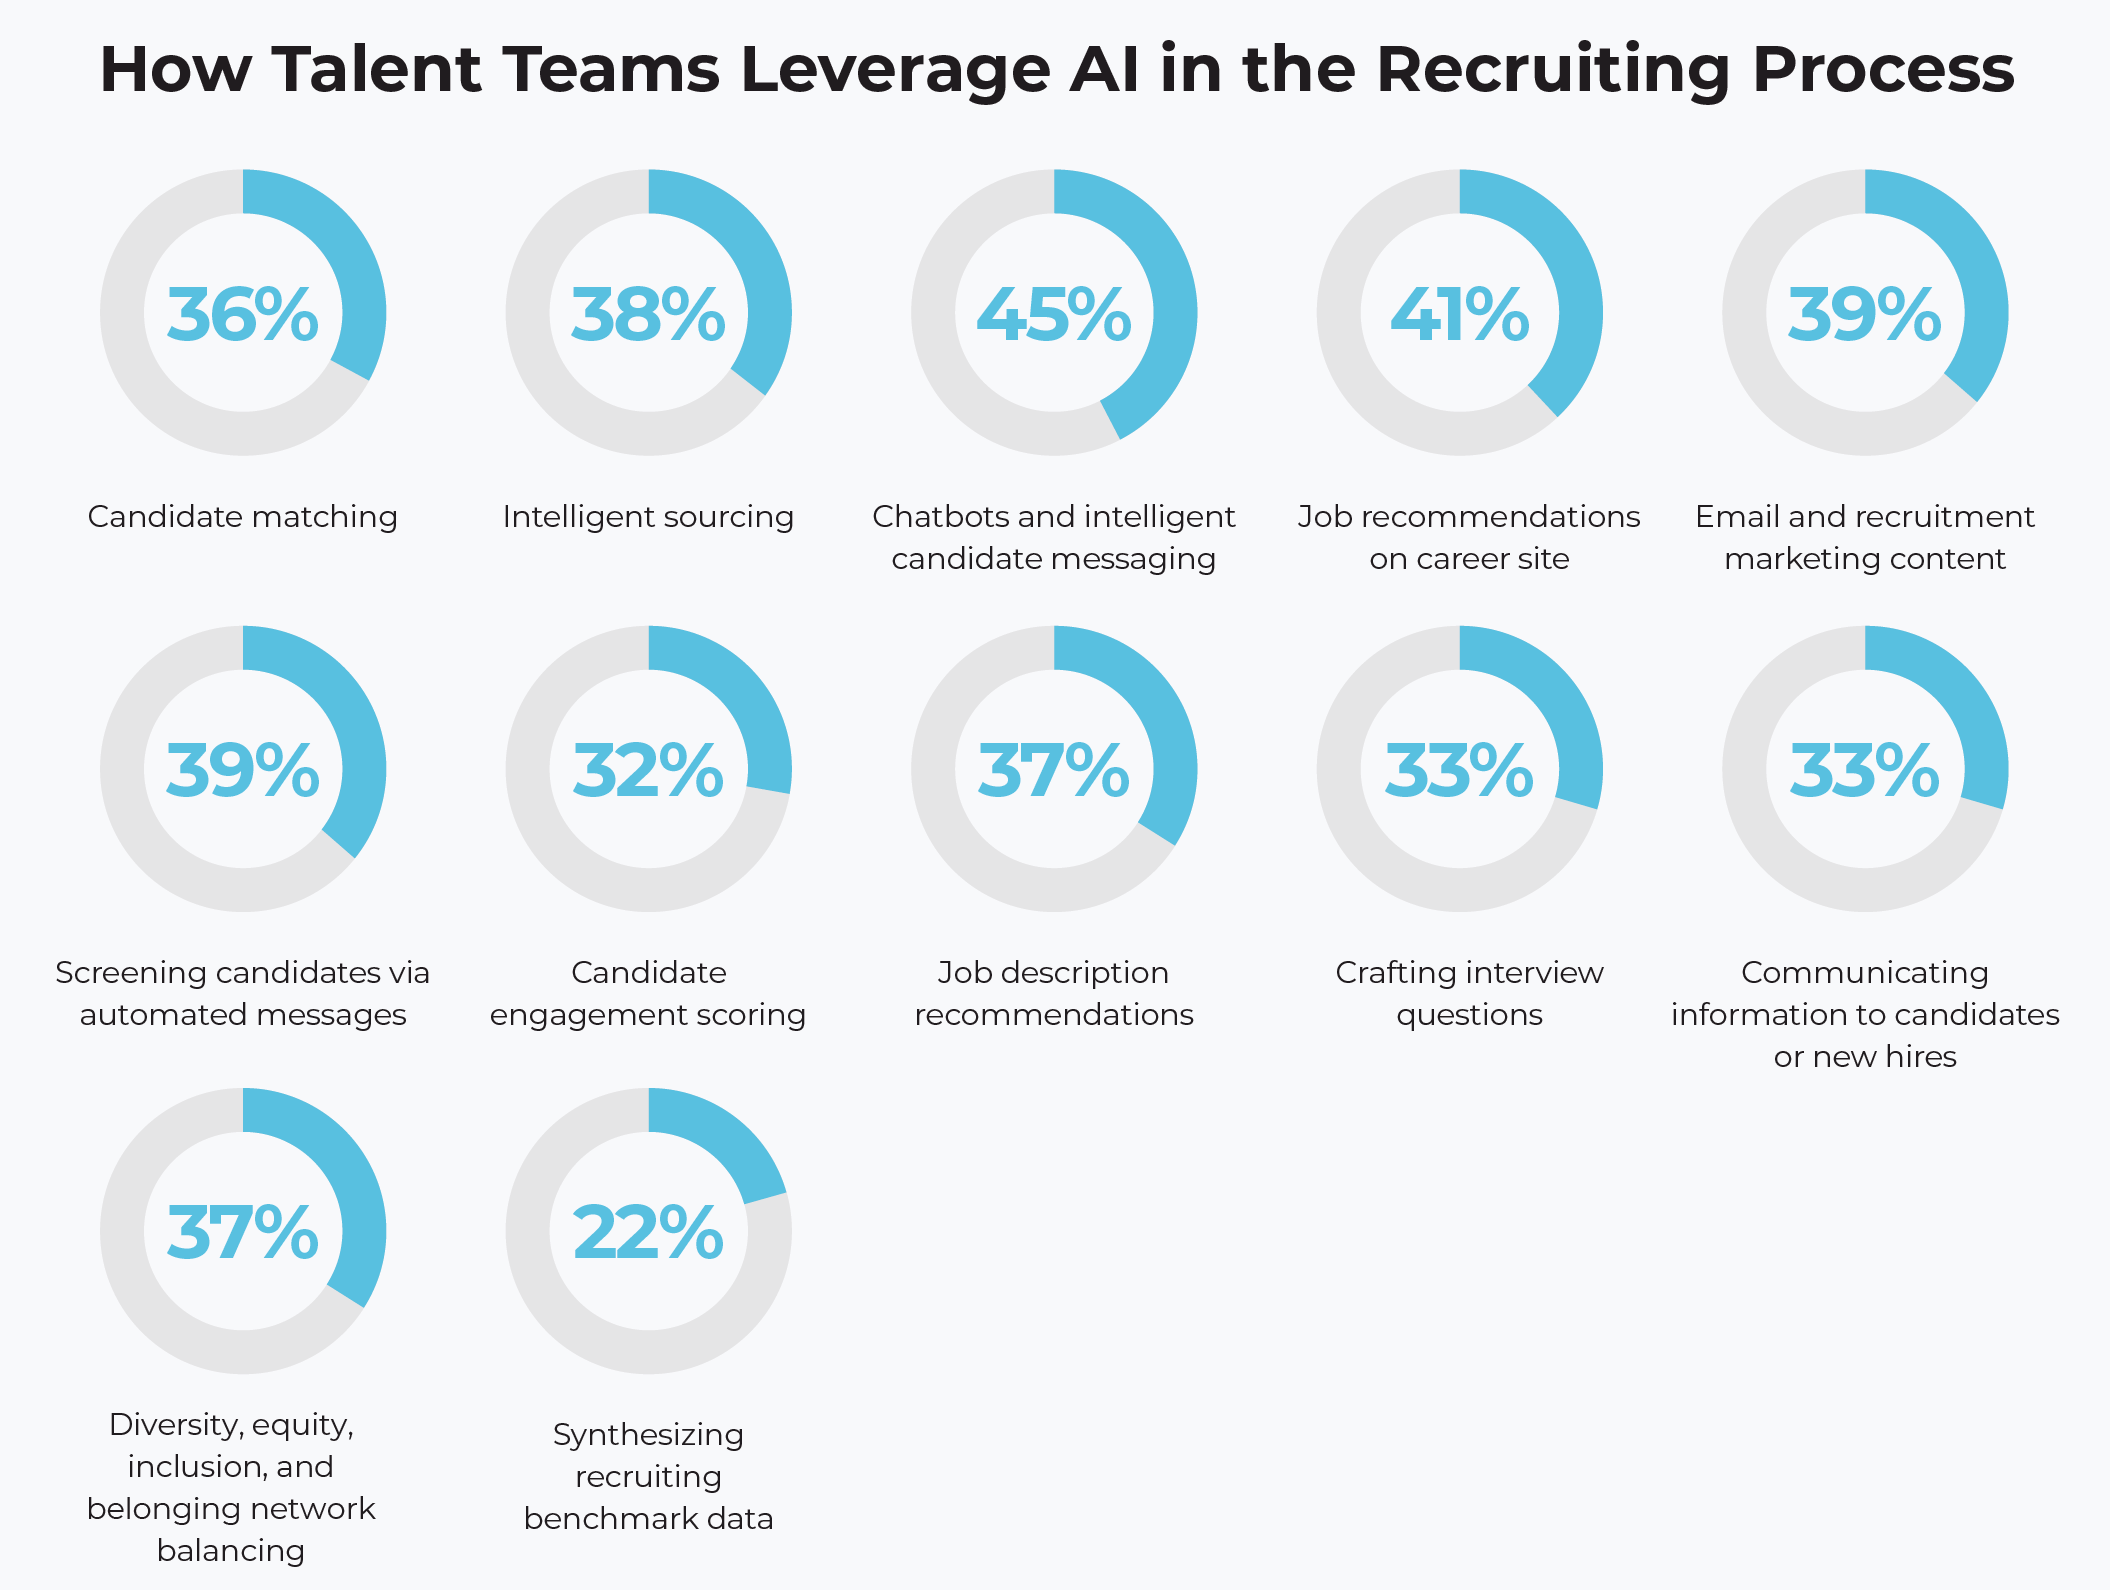 How AI Teams Leverage AI in the Recruiting Process